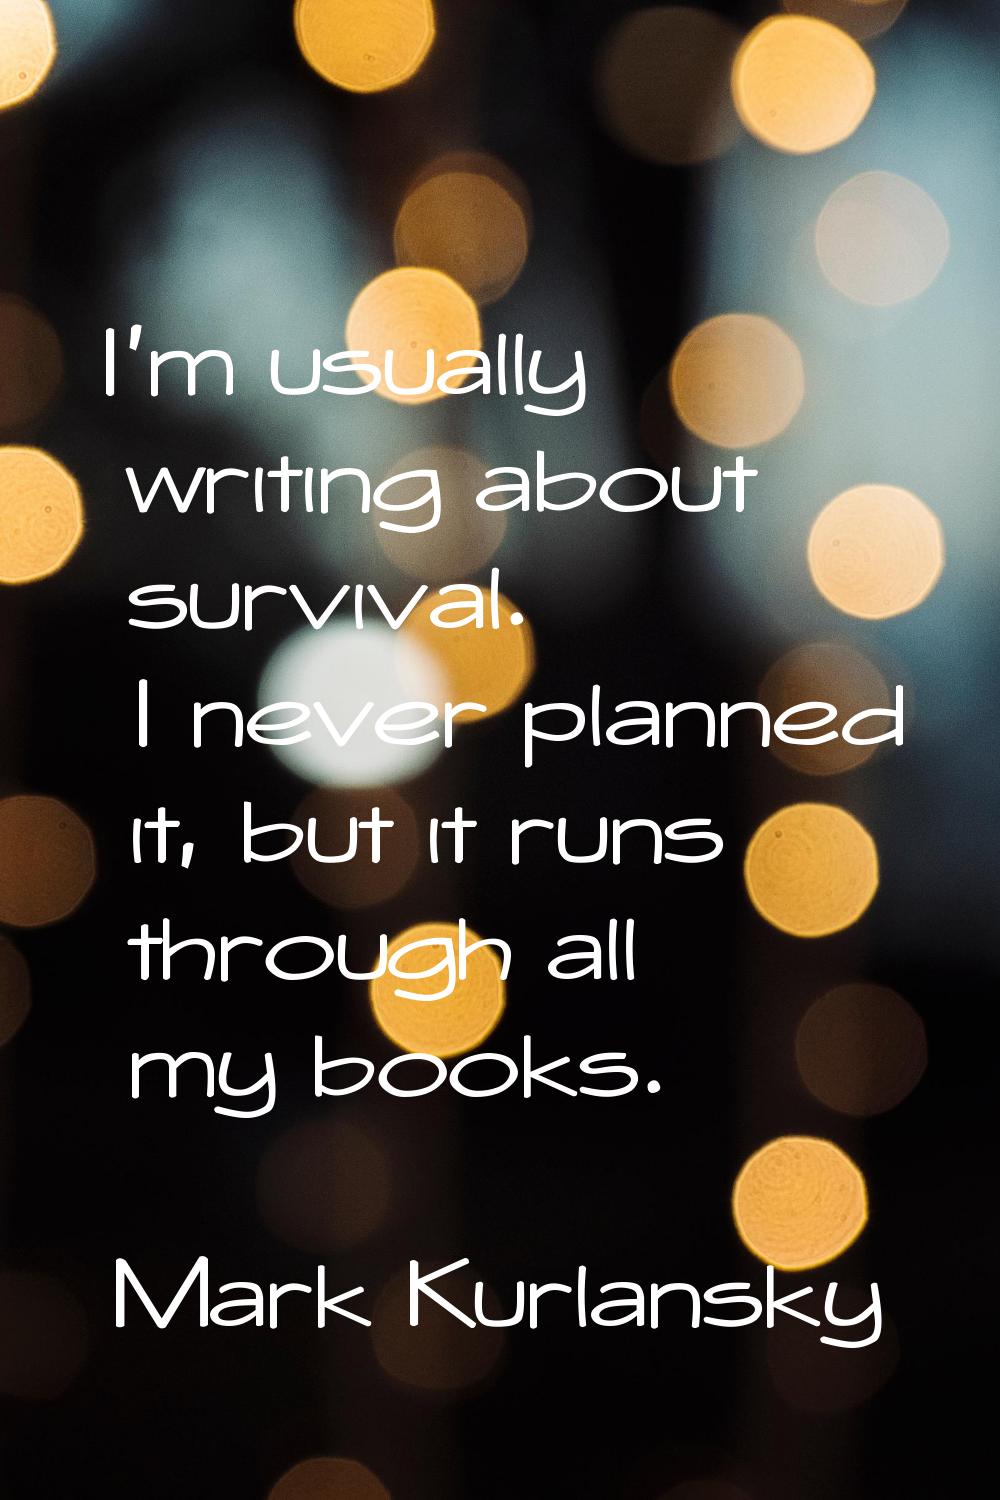 I'm usually writing about survival. I never planned it, but it runs through all my books.